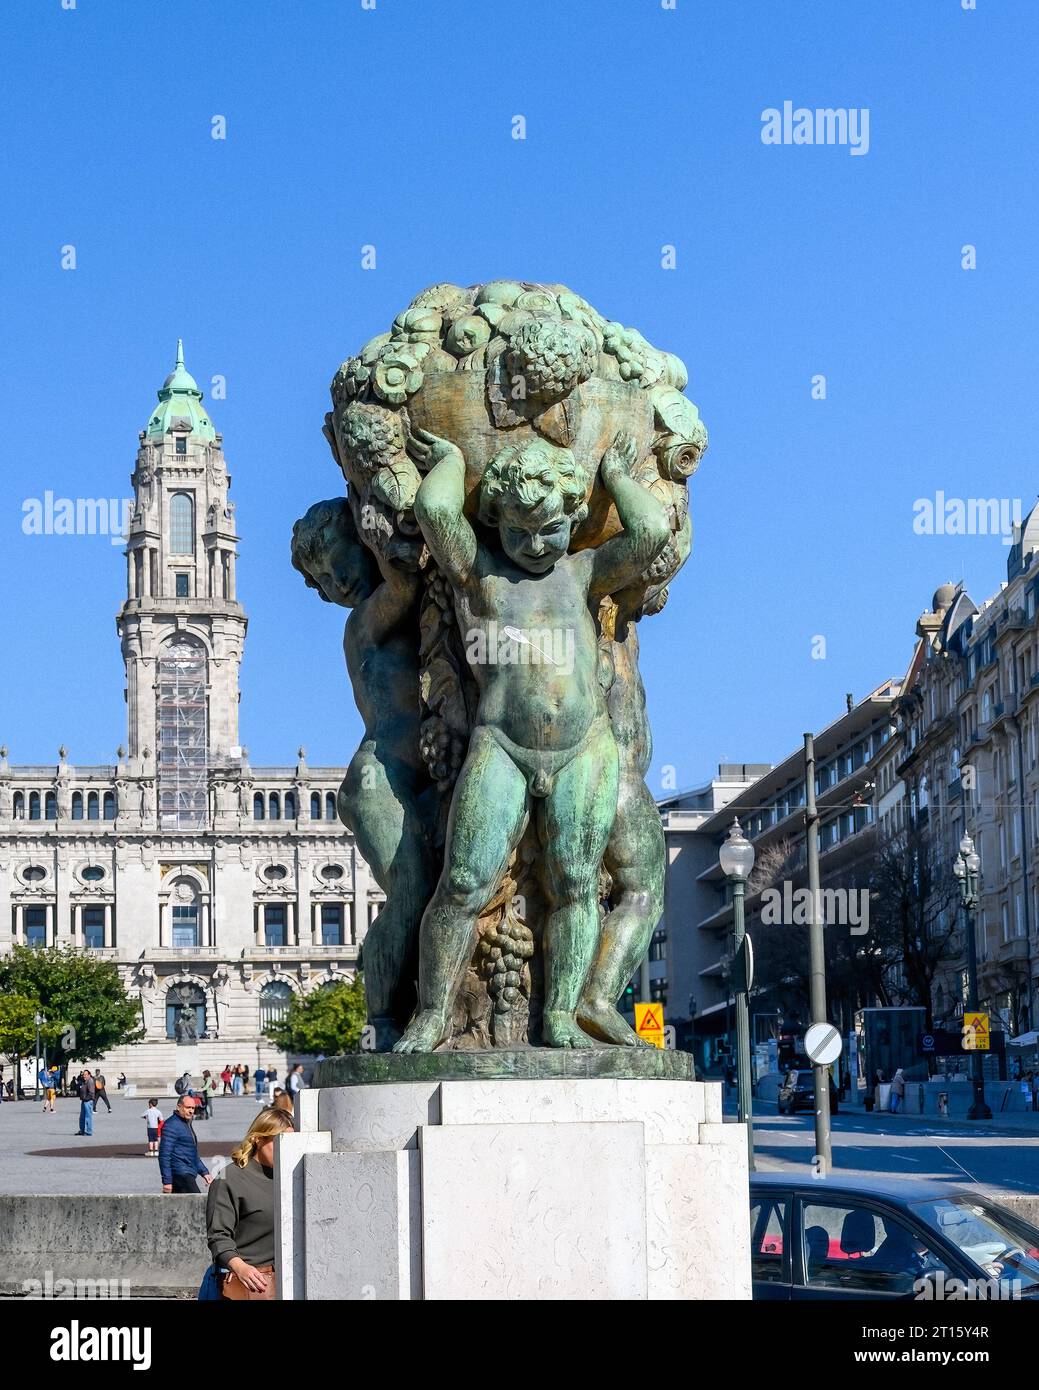 A statue or sculpture named 'The Boys - The Abundance' by Henrique Moreira. The famous work of art is located in the Avenida dos Aliados Stock Photo